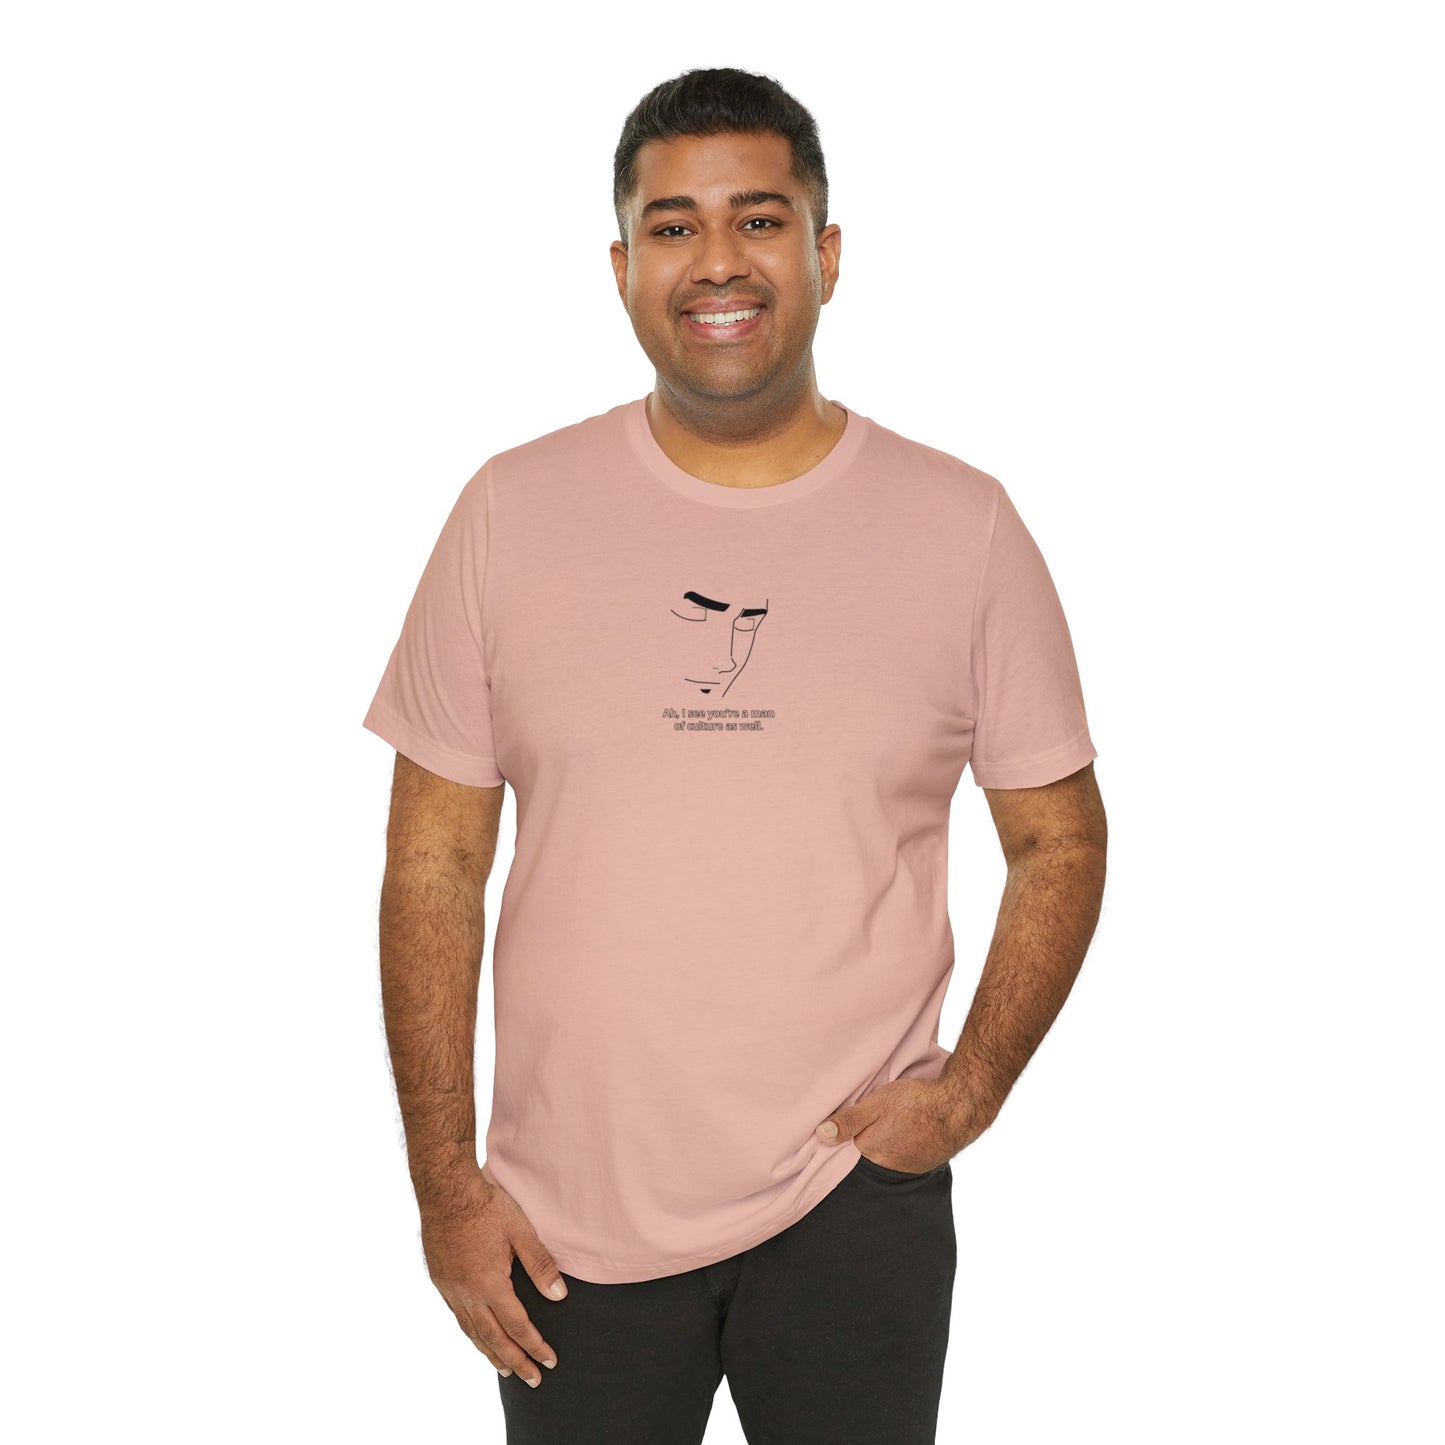 Ah, I See You Are a Man of Culture! Jersey T-Shirt